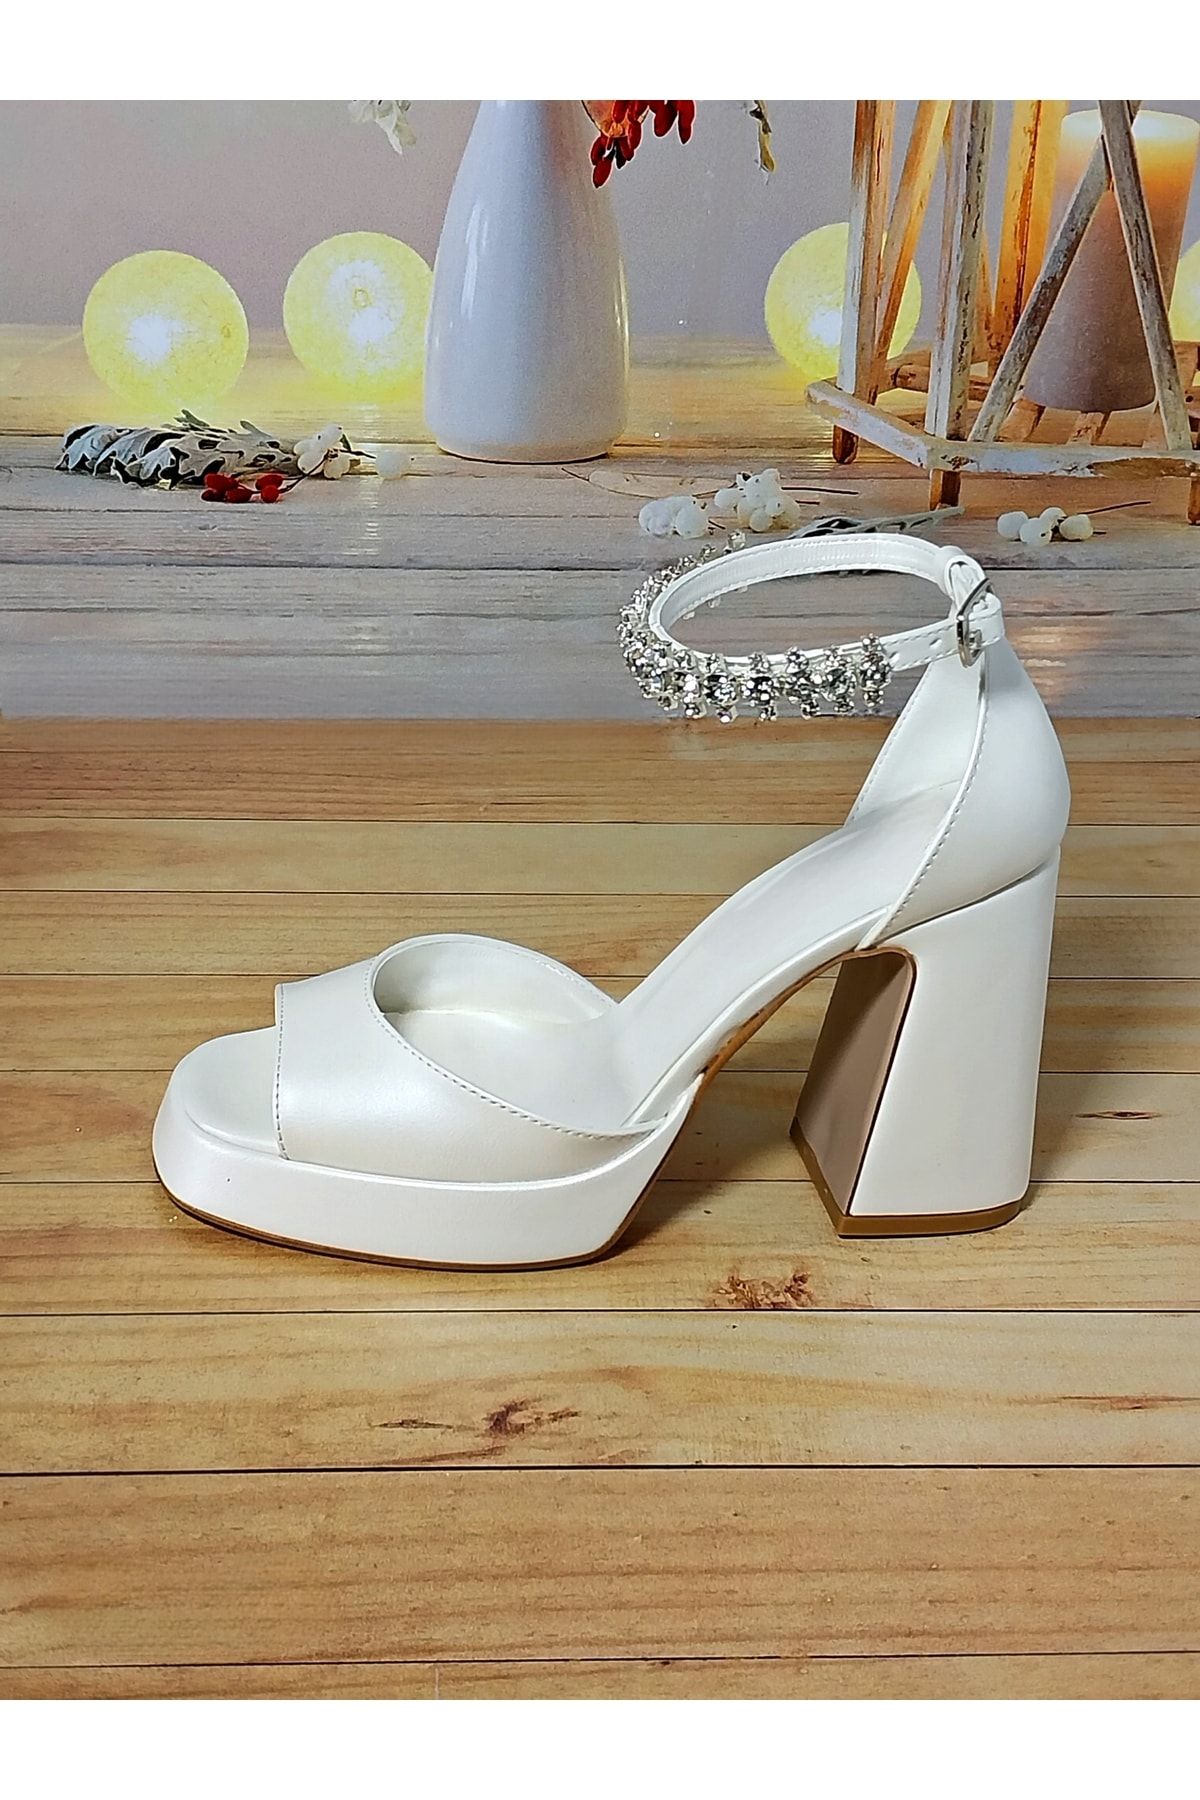 Bridal Actitud Platforms Frames White and Silver – Anabella by Rossy Sanchez